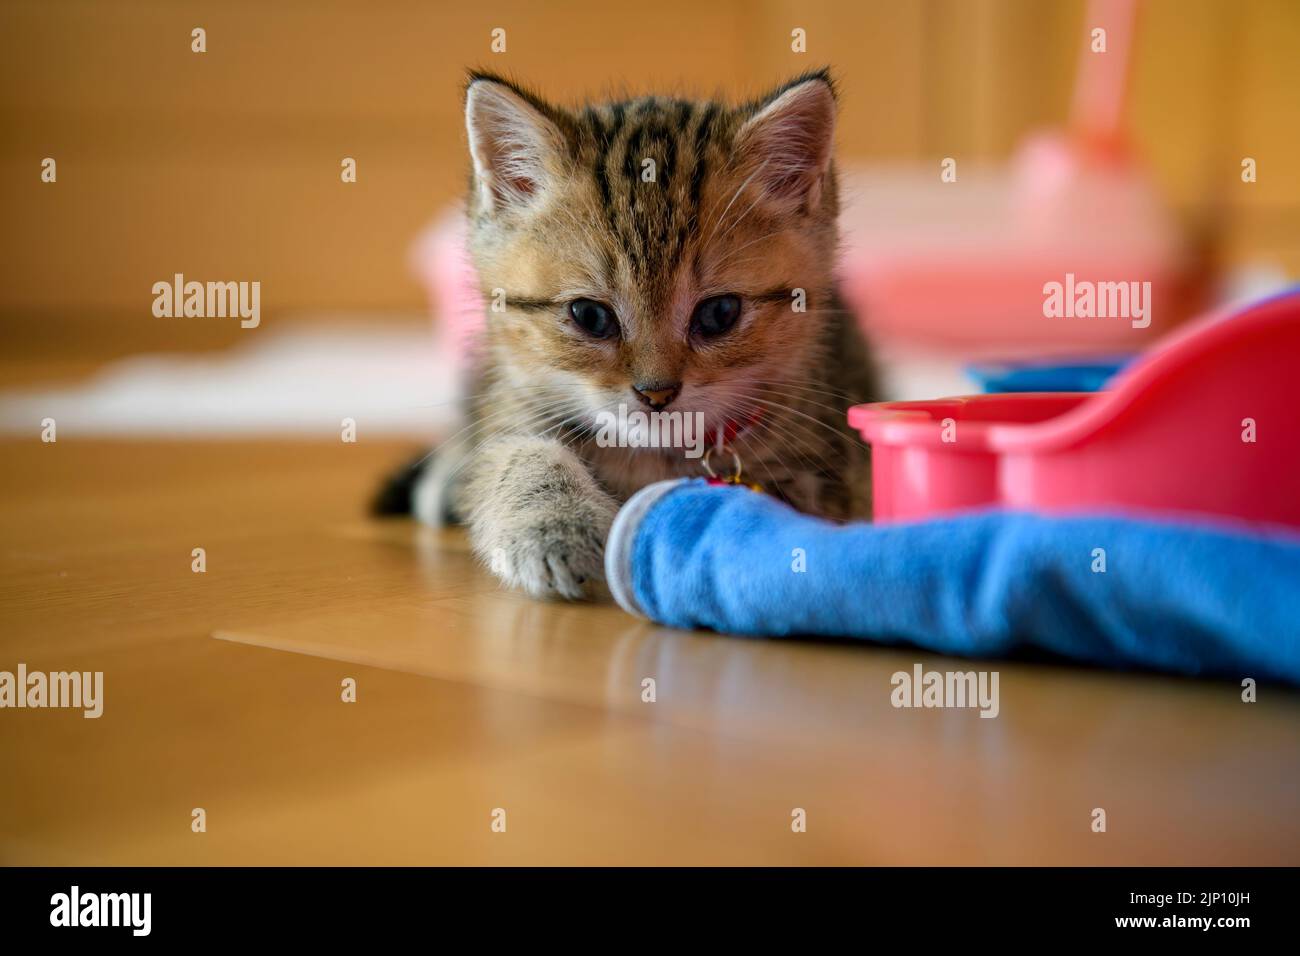 Kitten sits on a wooden floor in the house and looks straight ahead. Front view and close-up of a kitten playing mischievously . Scottish Fold tabby c Stock Photo